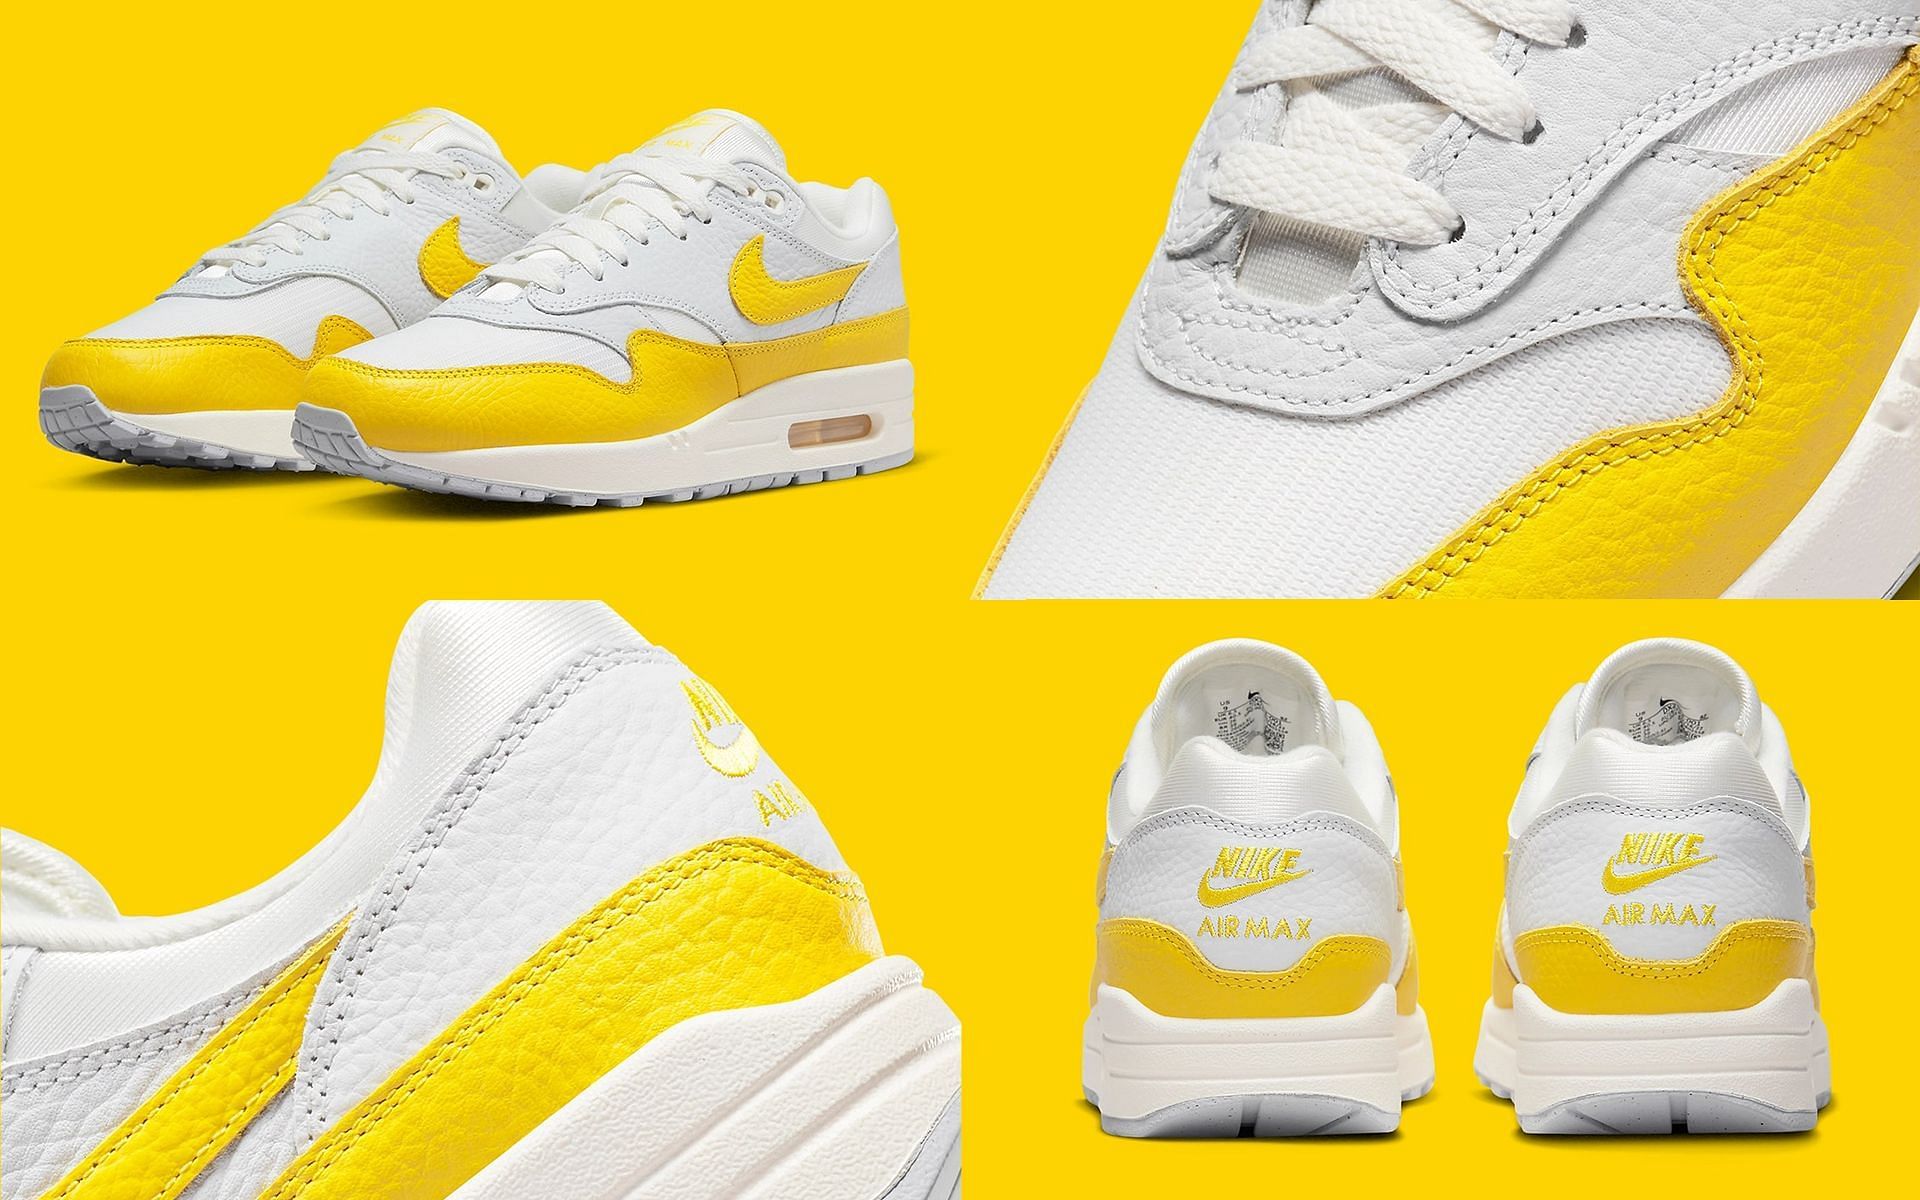 Reasons explained: why the Nike Air Max silhouettes are an expensive lineage (Image via Nike)